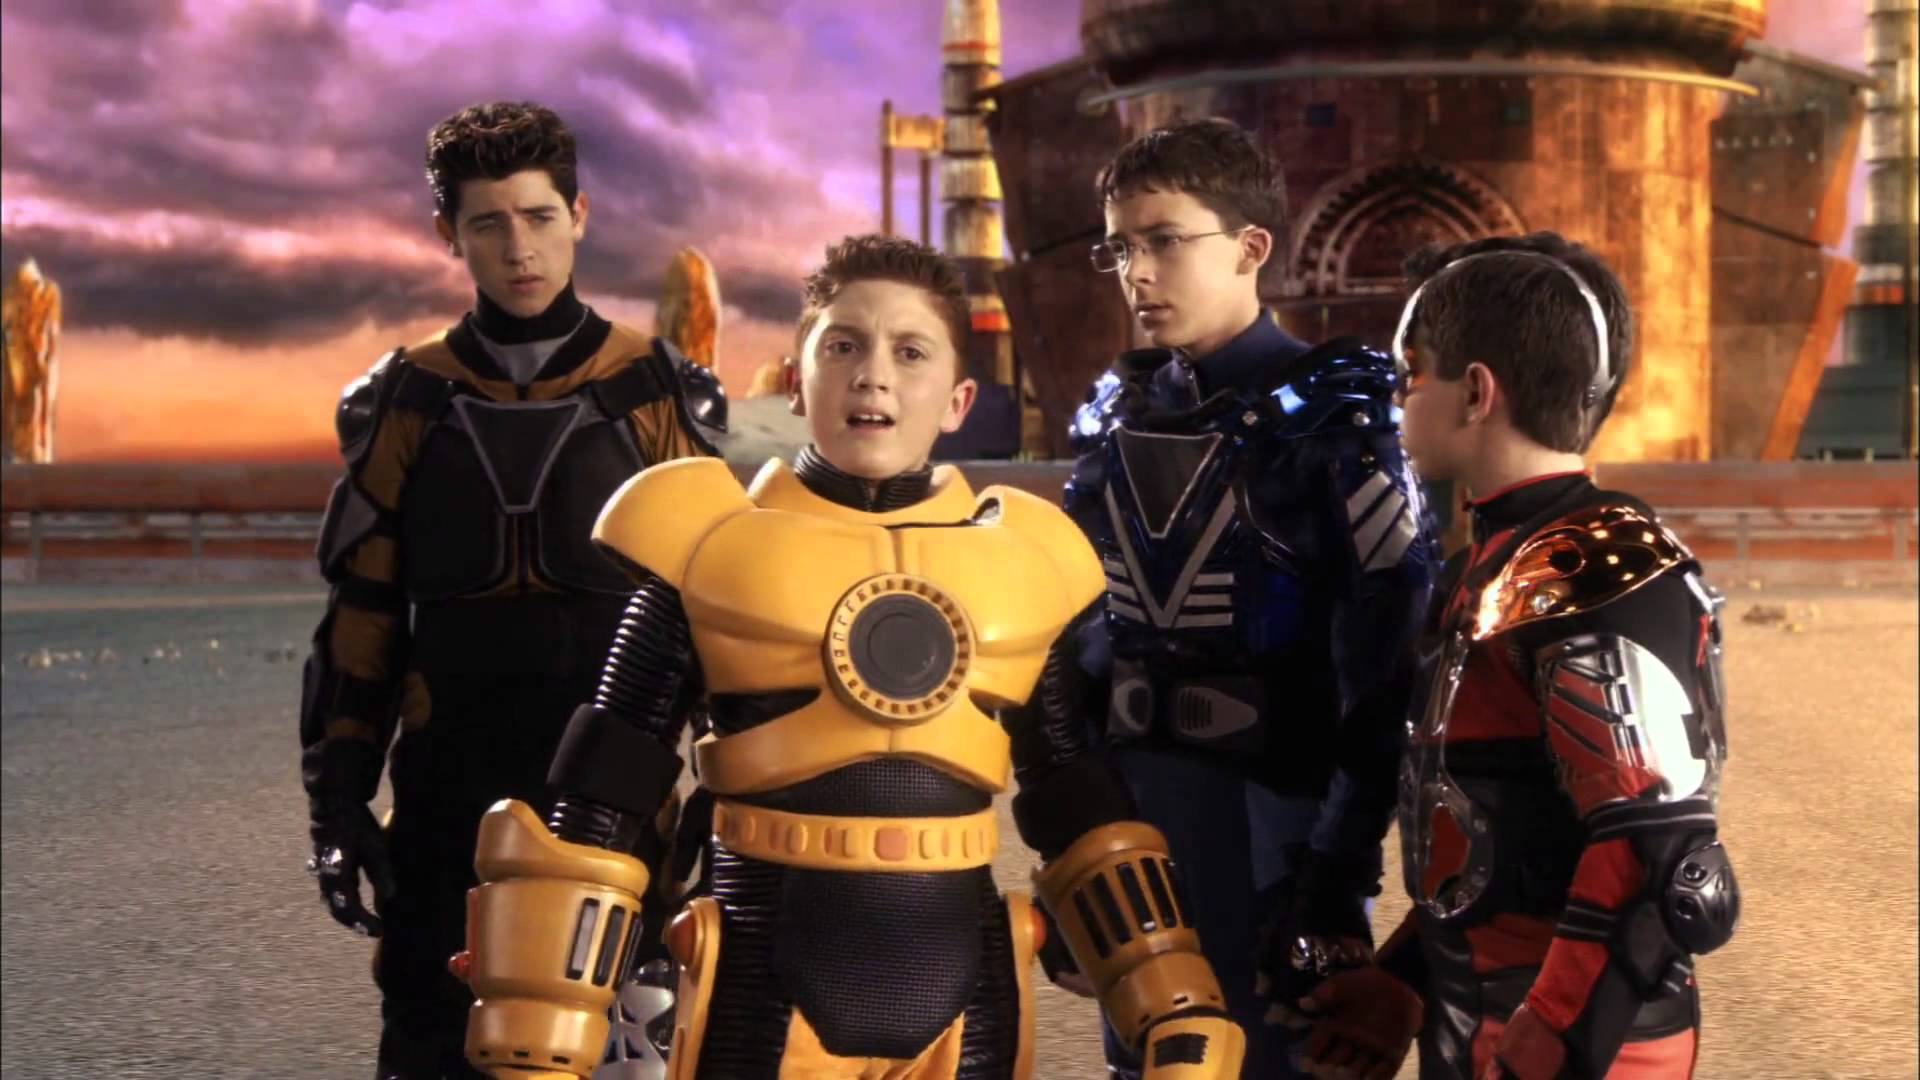 download Spy Kids Learning Adventures: Mission: Man in the Moon